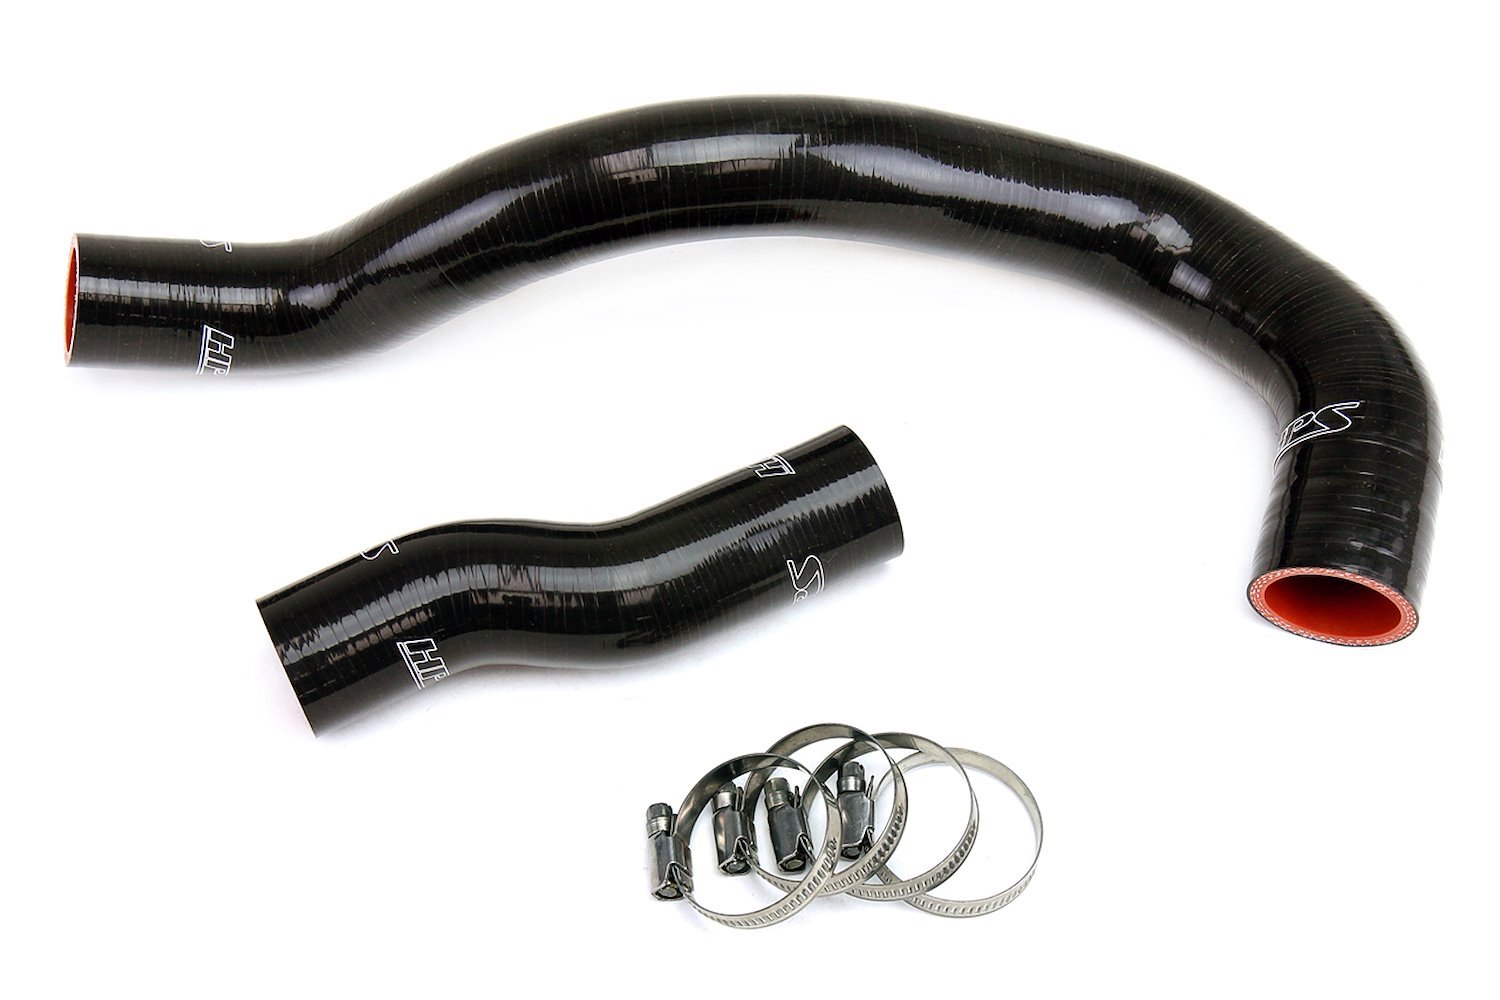 57-1266-BLK Radiator Hose Kit, High-Temp 3-Ply Reinforced Silicone, Replace OEM Rubber Radiator Coolant Hoses